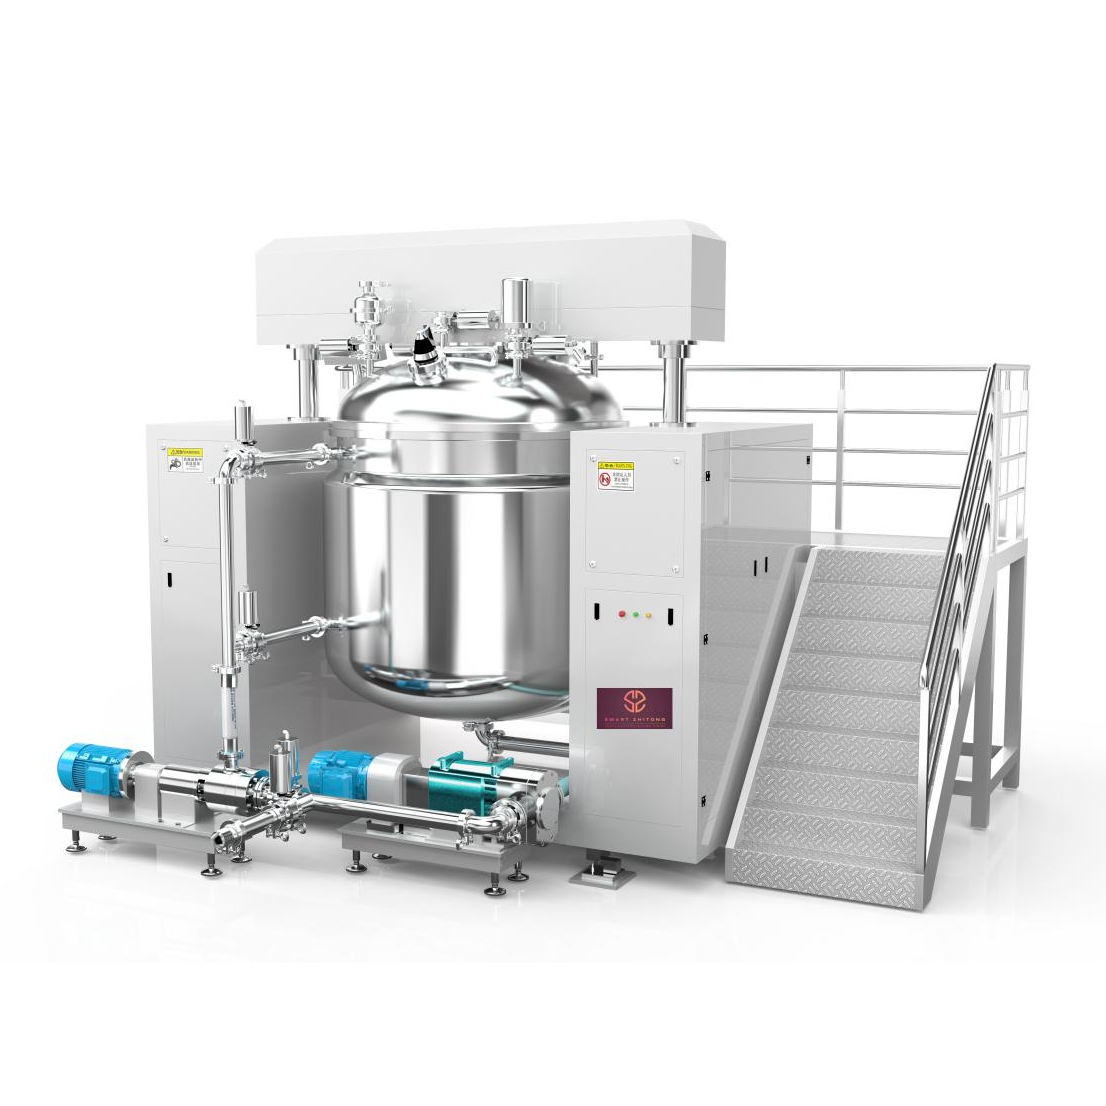 Super Lowest Price Ointment Manufacturing Machine – Ointment Mixing Machine for pharmaceuticals industry with CE UL TUV – Smart ZhiTong